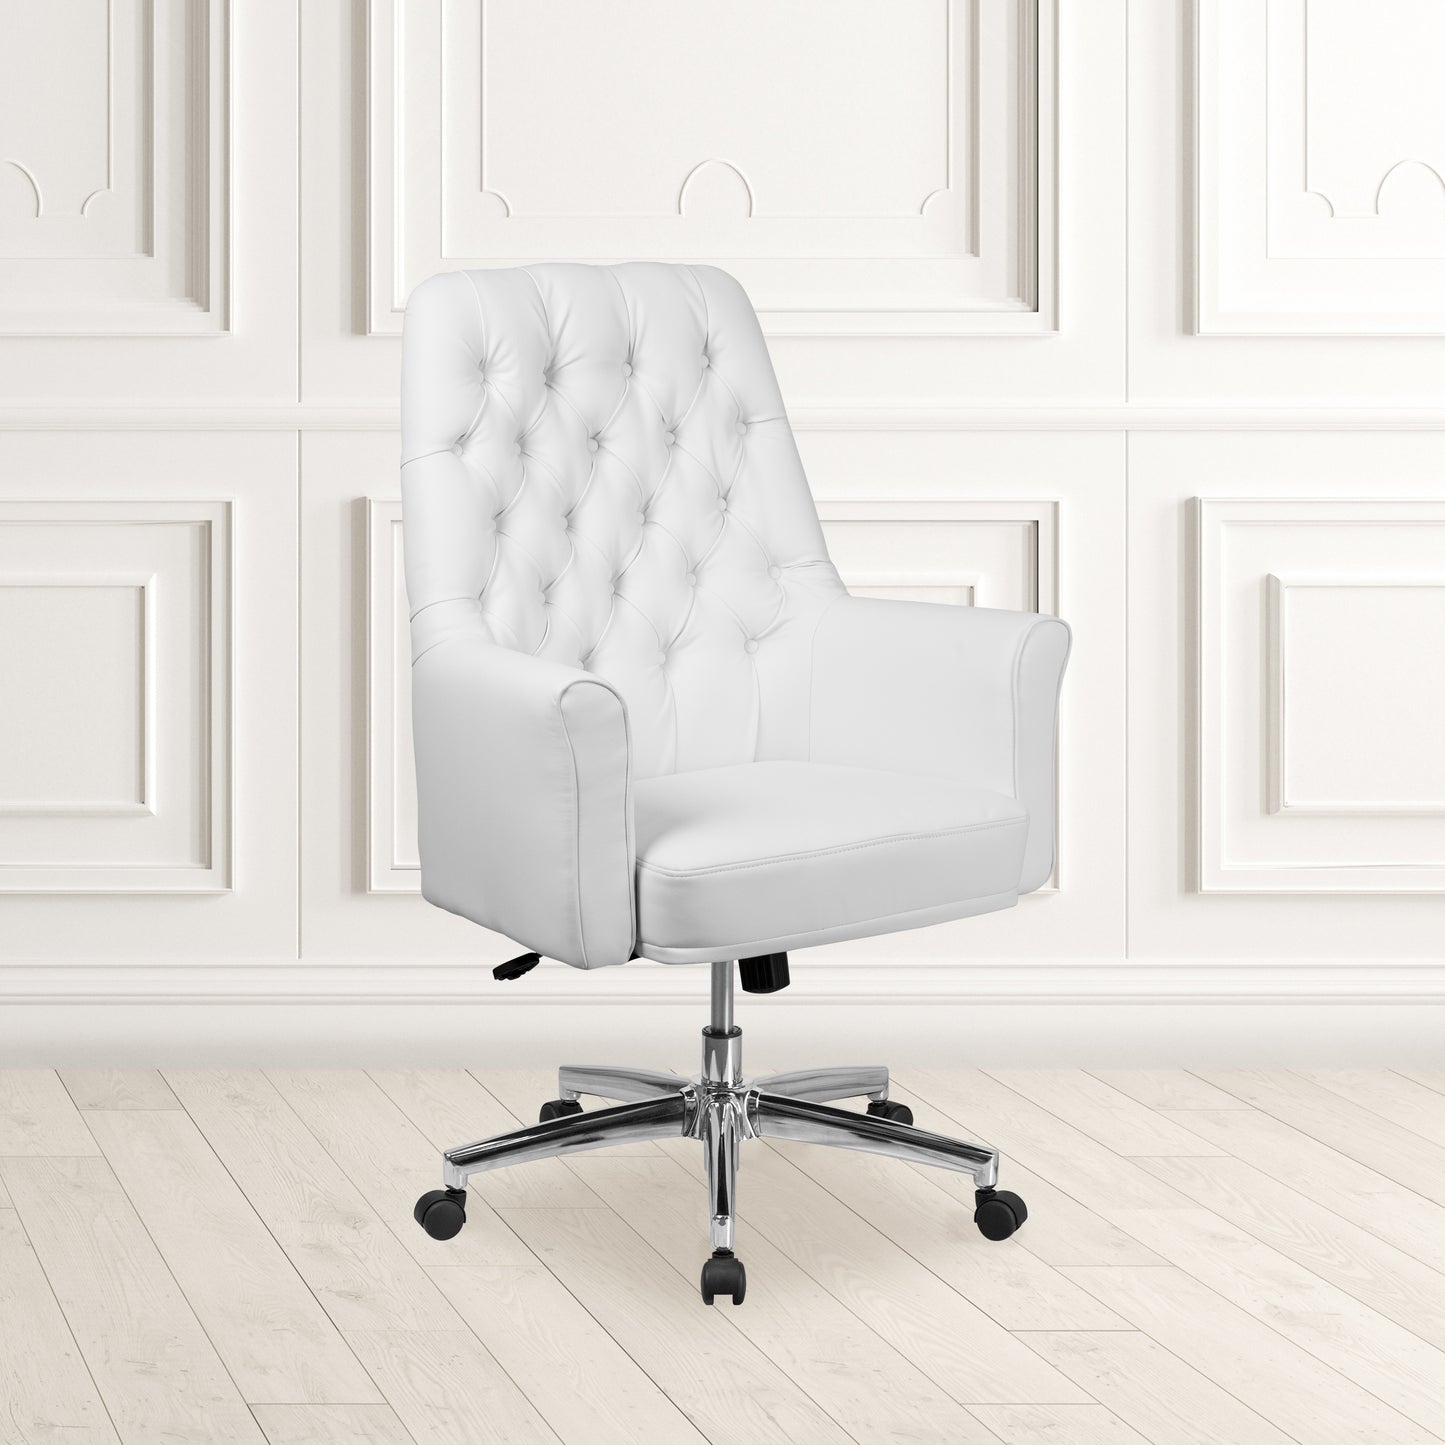 Tufted Leather Executive Chair